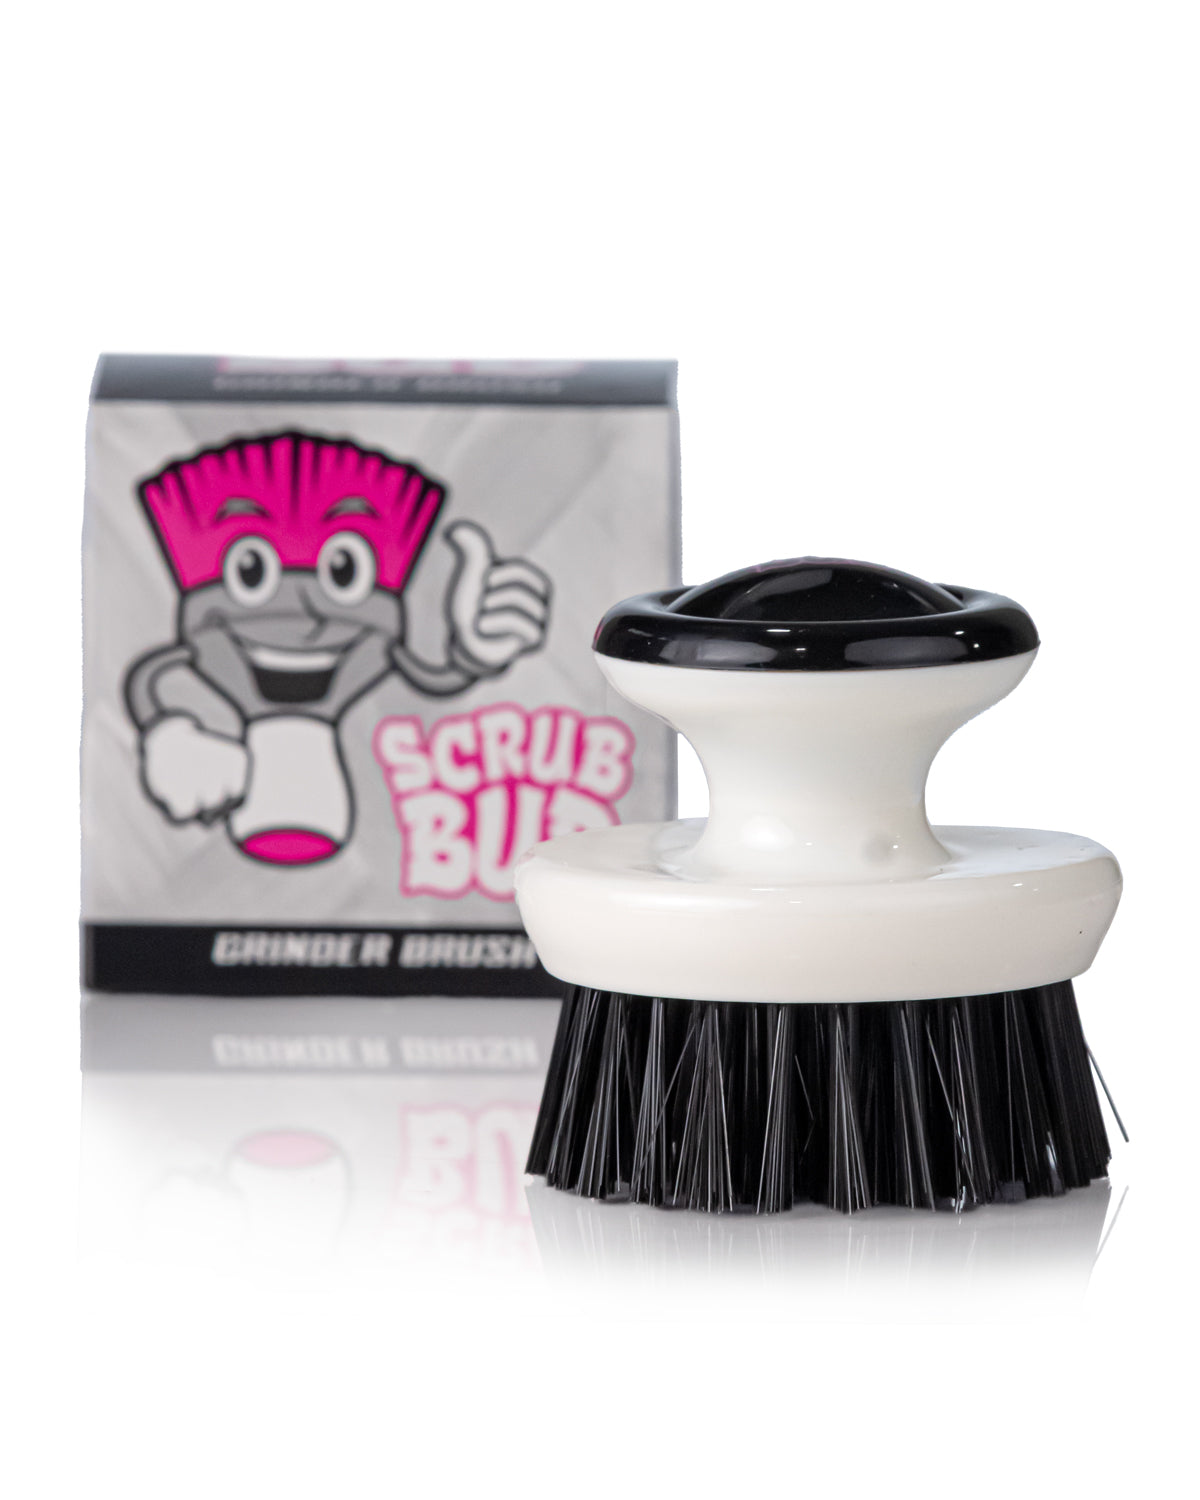 Buy Headchef Herb Grinder Cleaning Brush: Grinder Cleaner from